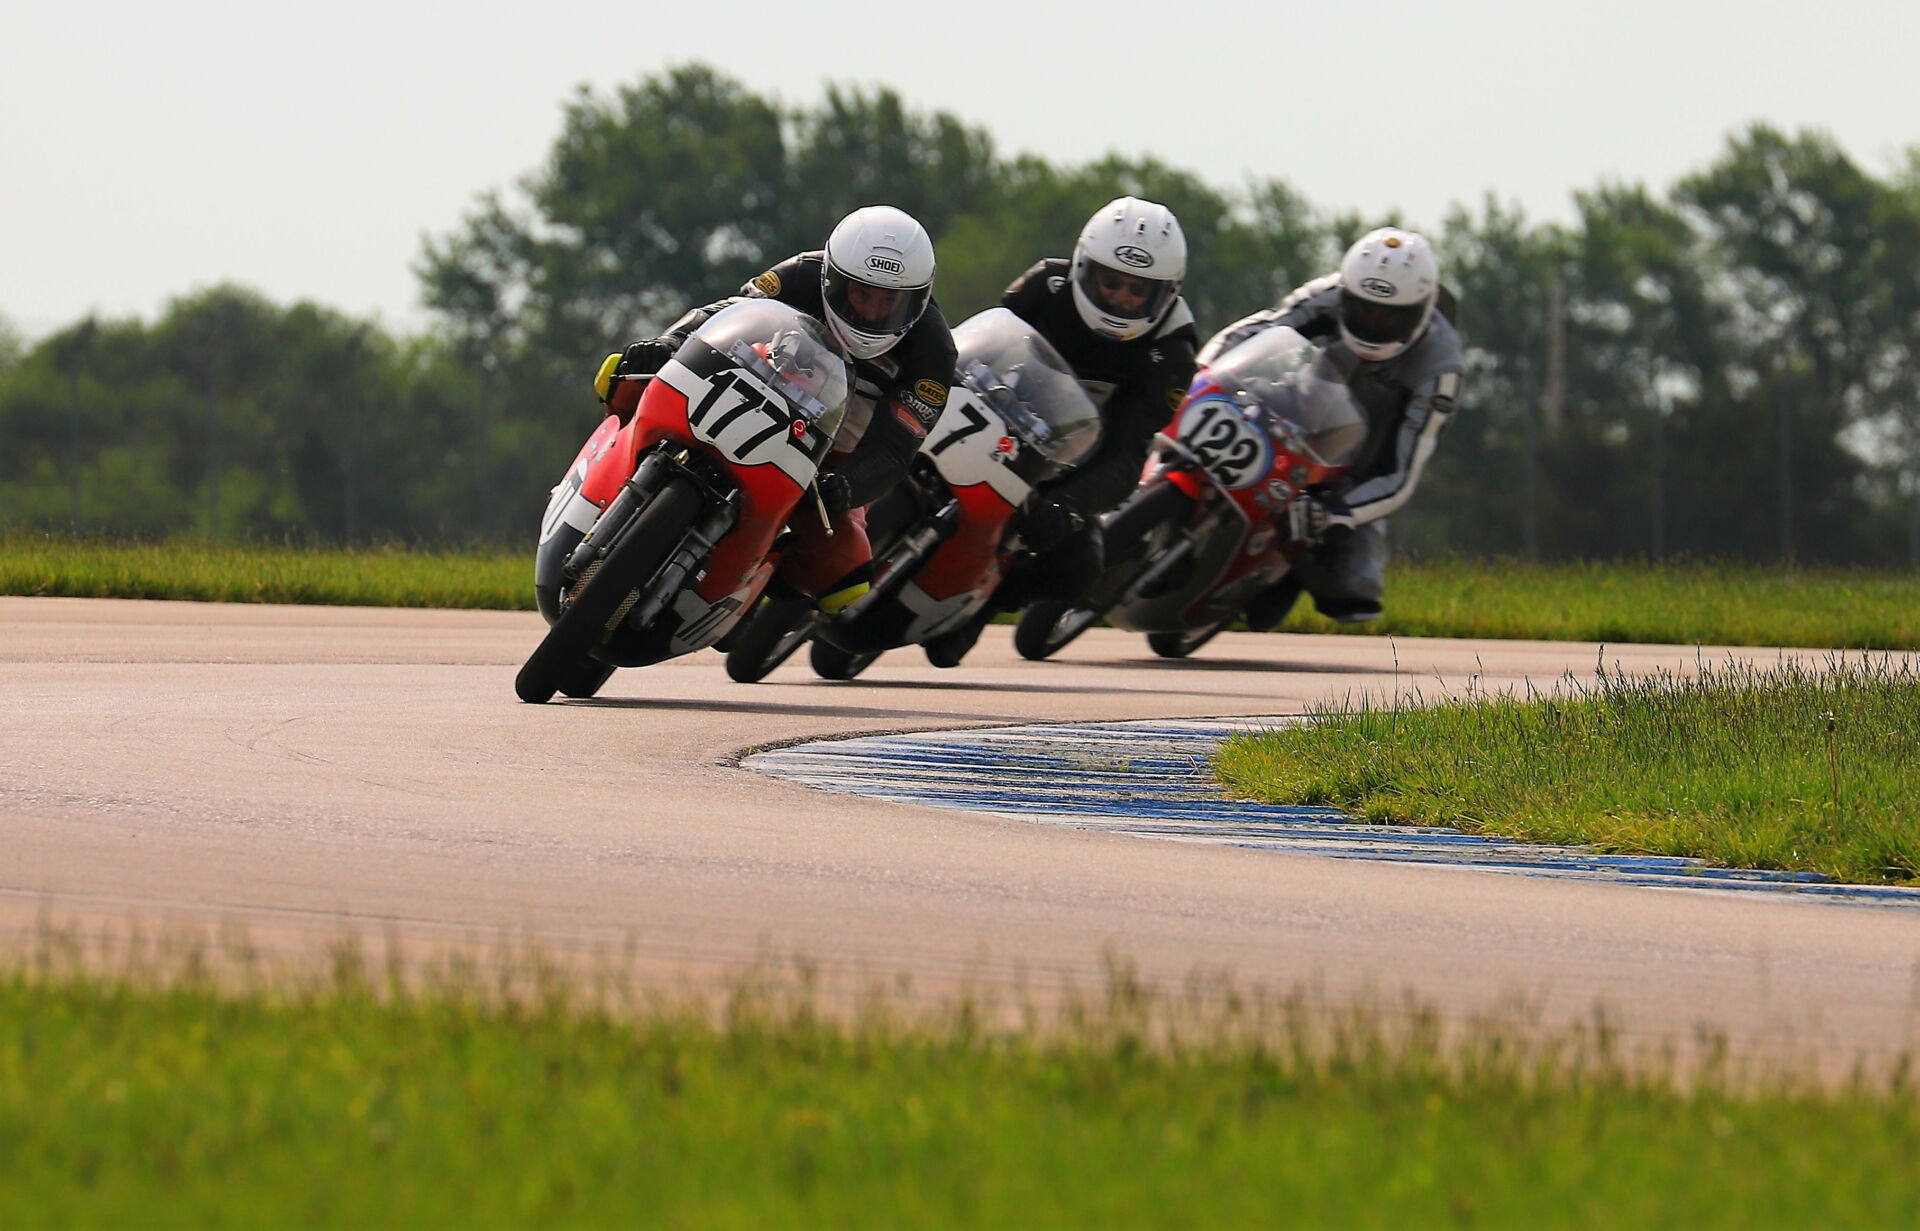 Walt Fulton (177), Dave Roper (7), and Alex McLean (122) racing closely during the 350 GP at Heartland Motorsports Park. Photo by etechphoto.com, courtesy AHRMA.